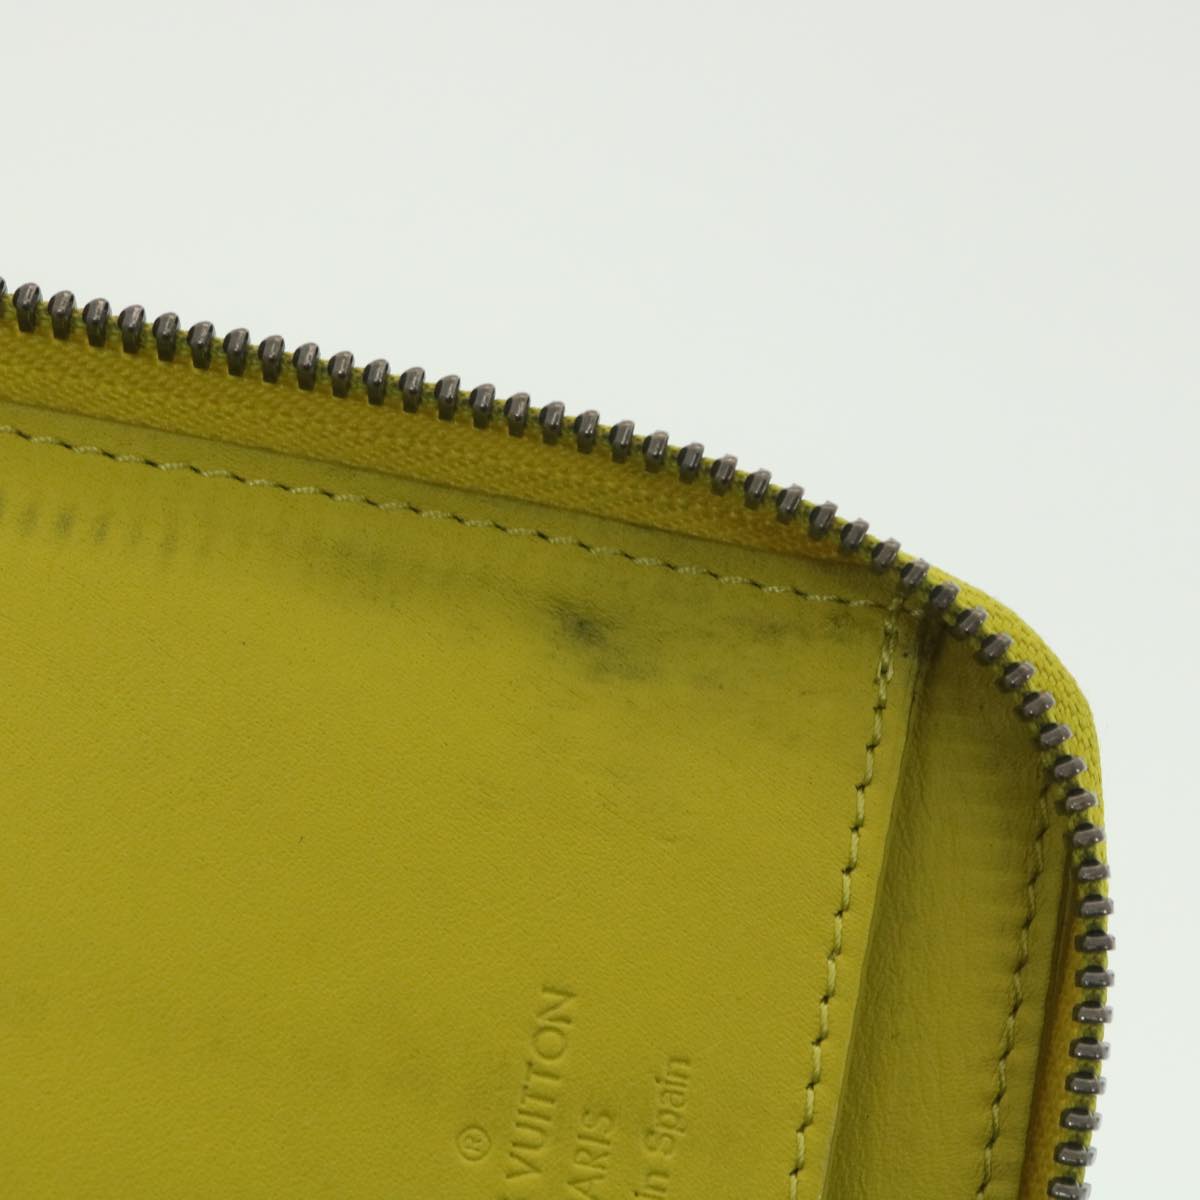 Louis Vuitton Epi Leather Yellow Long Zippy Wallet. Made in Spain.